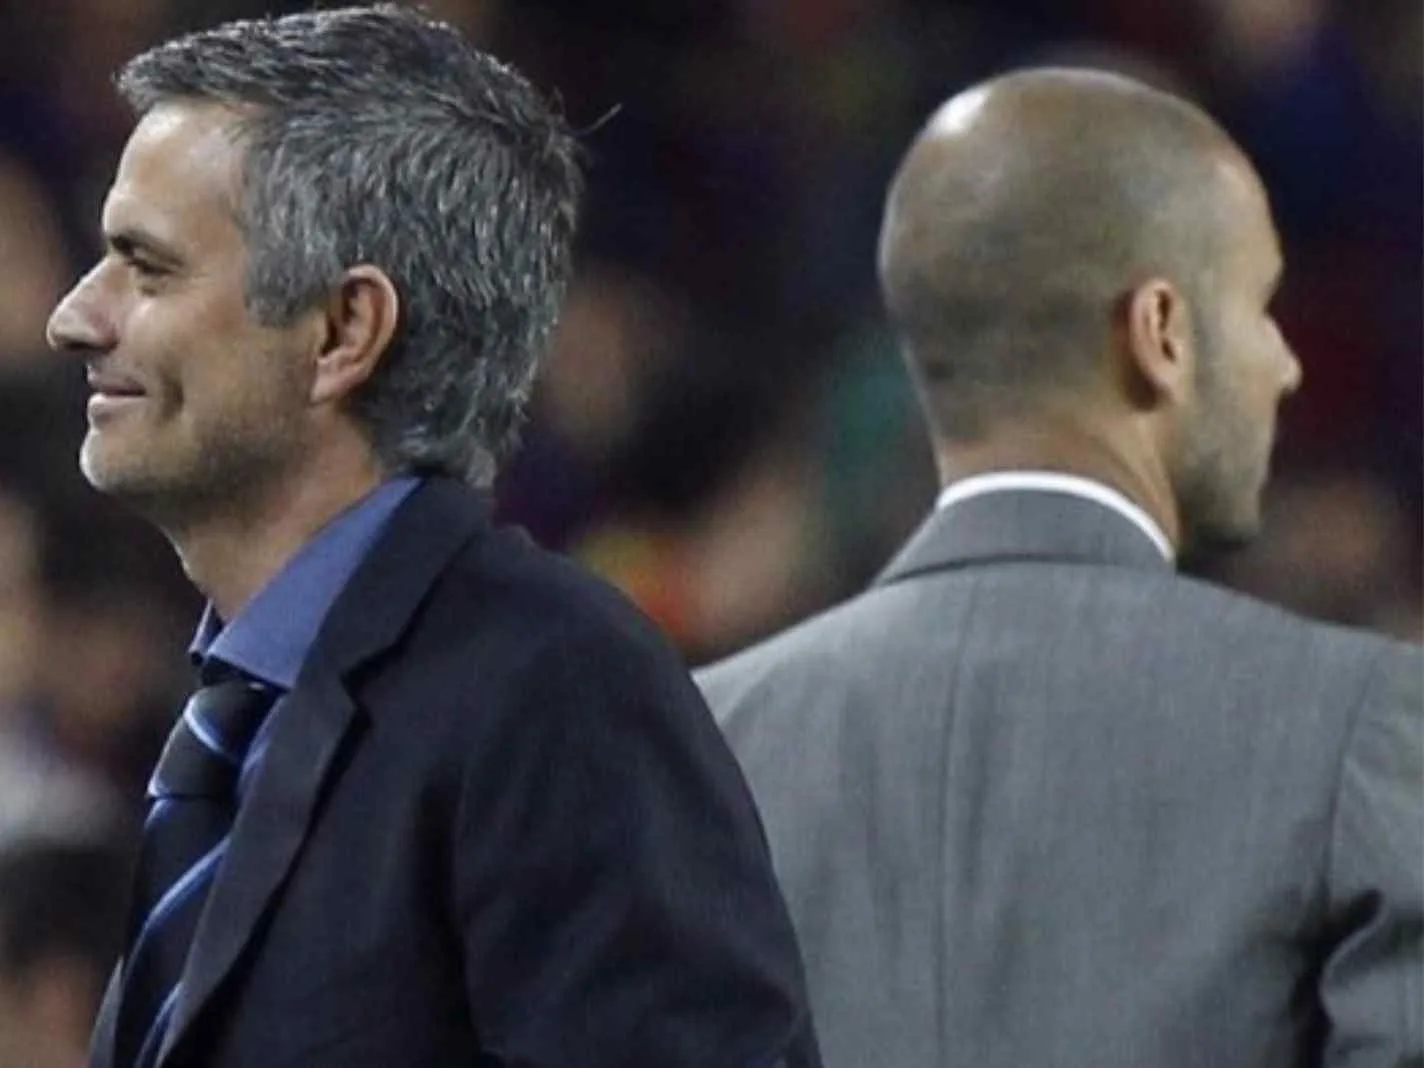 In this image - Jose Mourinho and Pep Guardiola